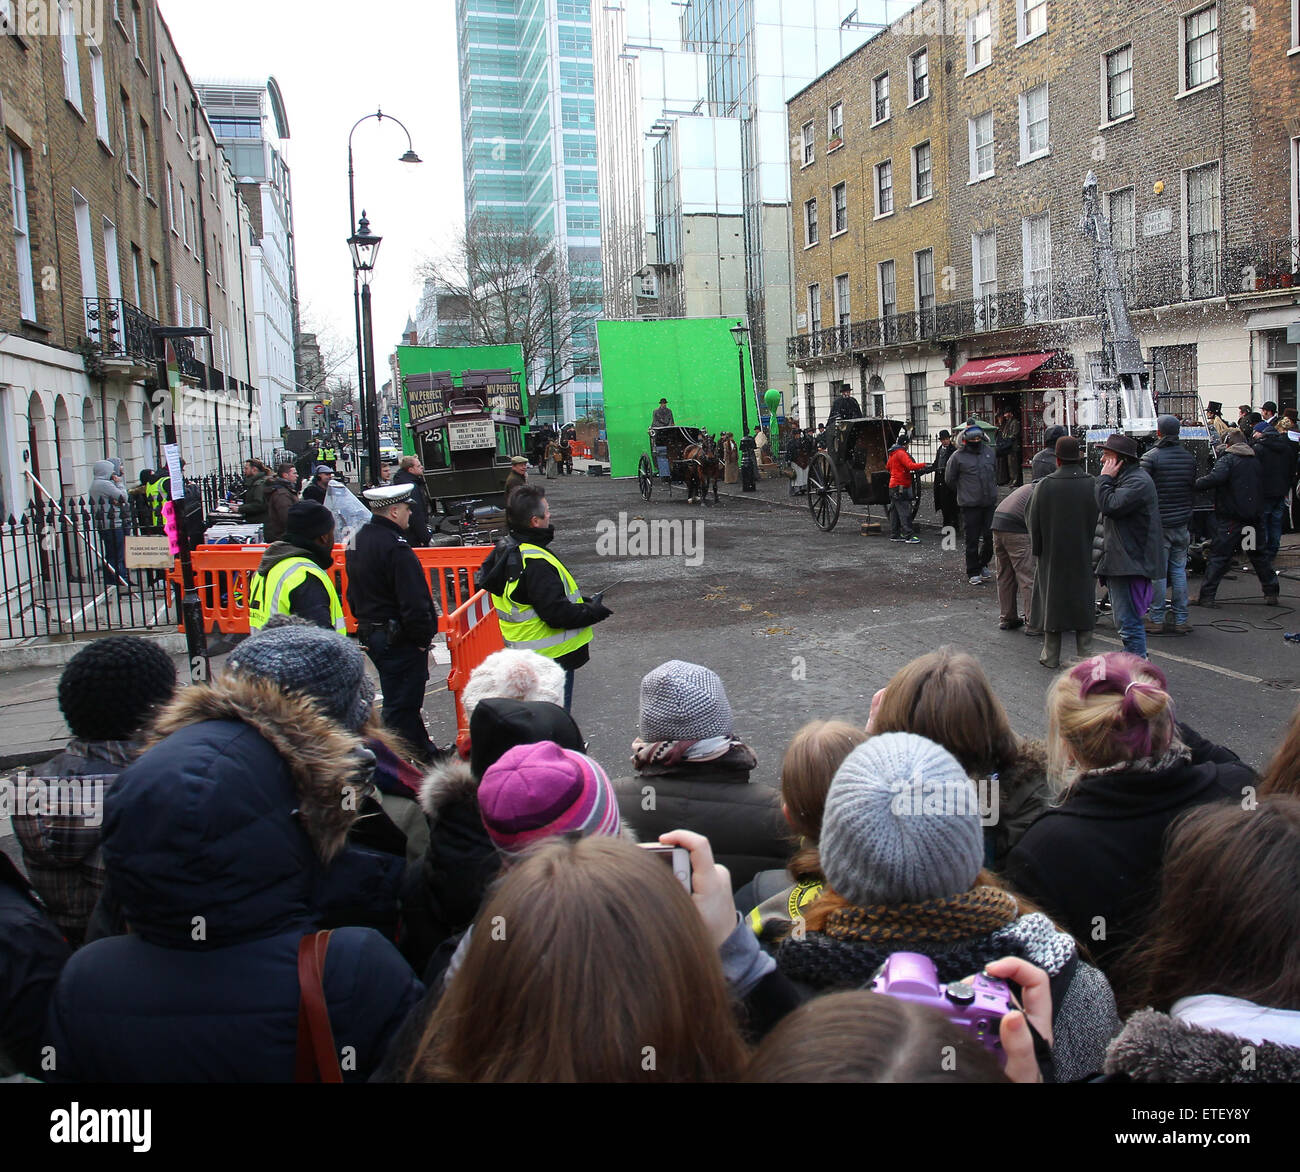 Benedict Cumberbatch and Martin Freeman film a scene for the 'Sherlock' christmas special in London  Featuring: View Where: London, United Kingdom When: 07 Feb 2015 Credit: WENN.com Stock Photo